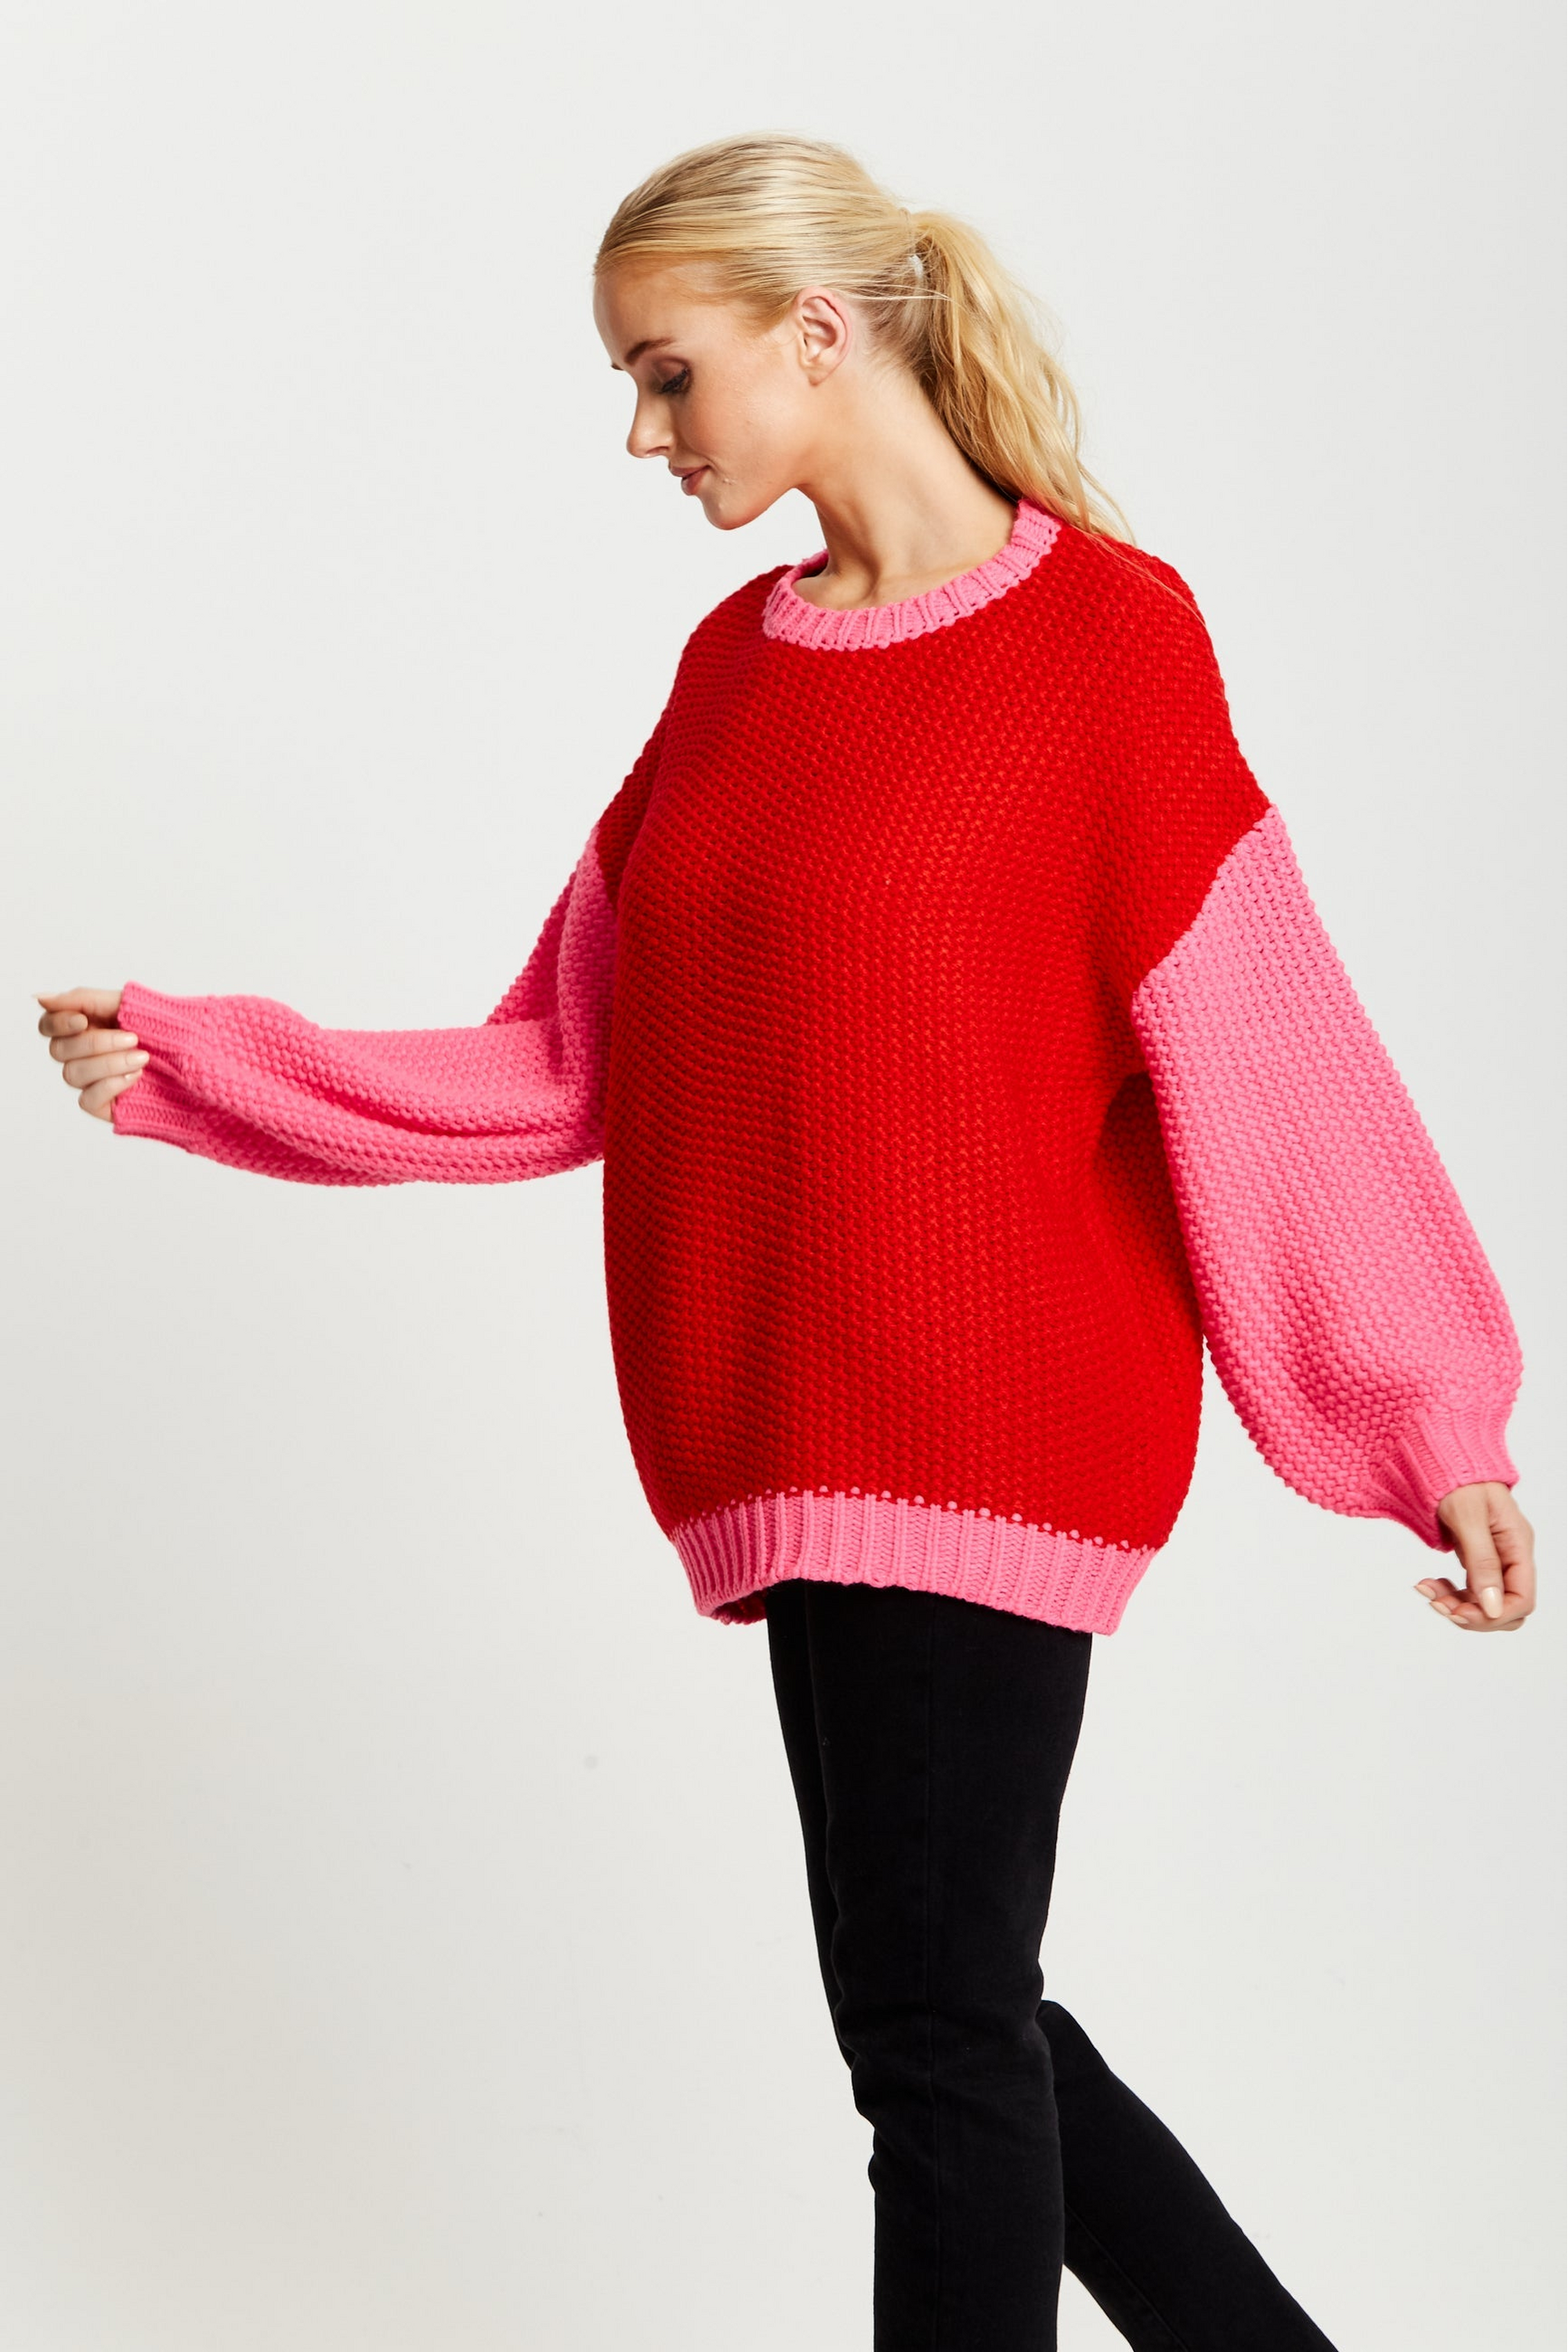 Contrast Sleeve Jumper In Pink And Red A14-LIQ21-191